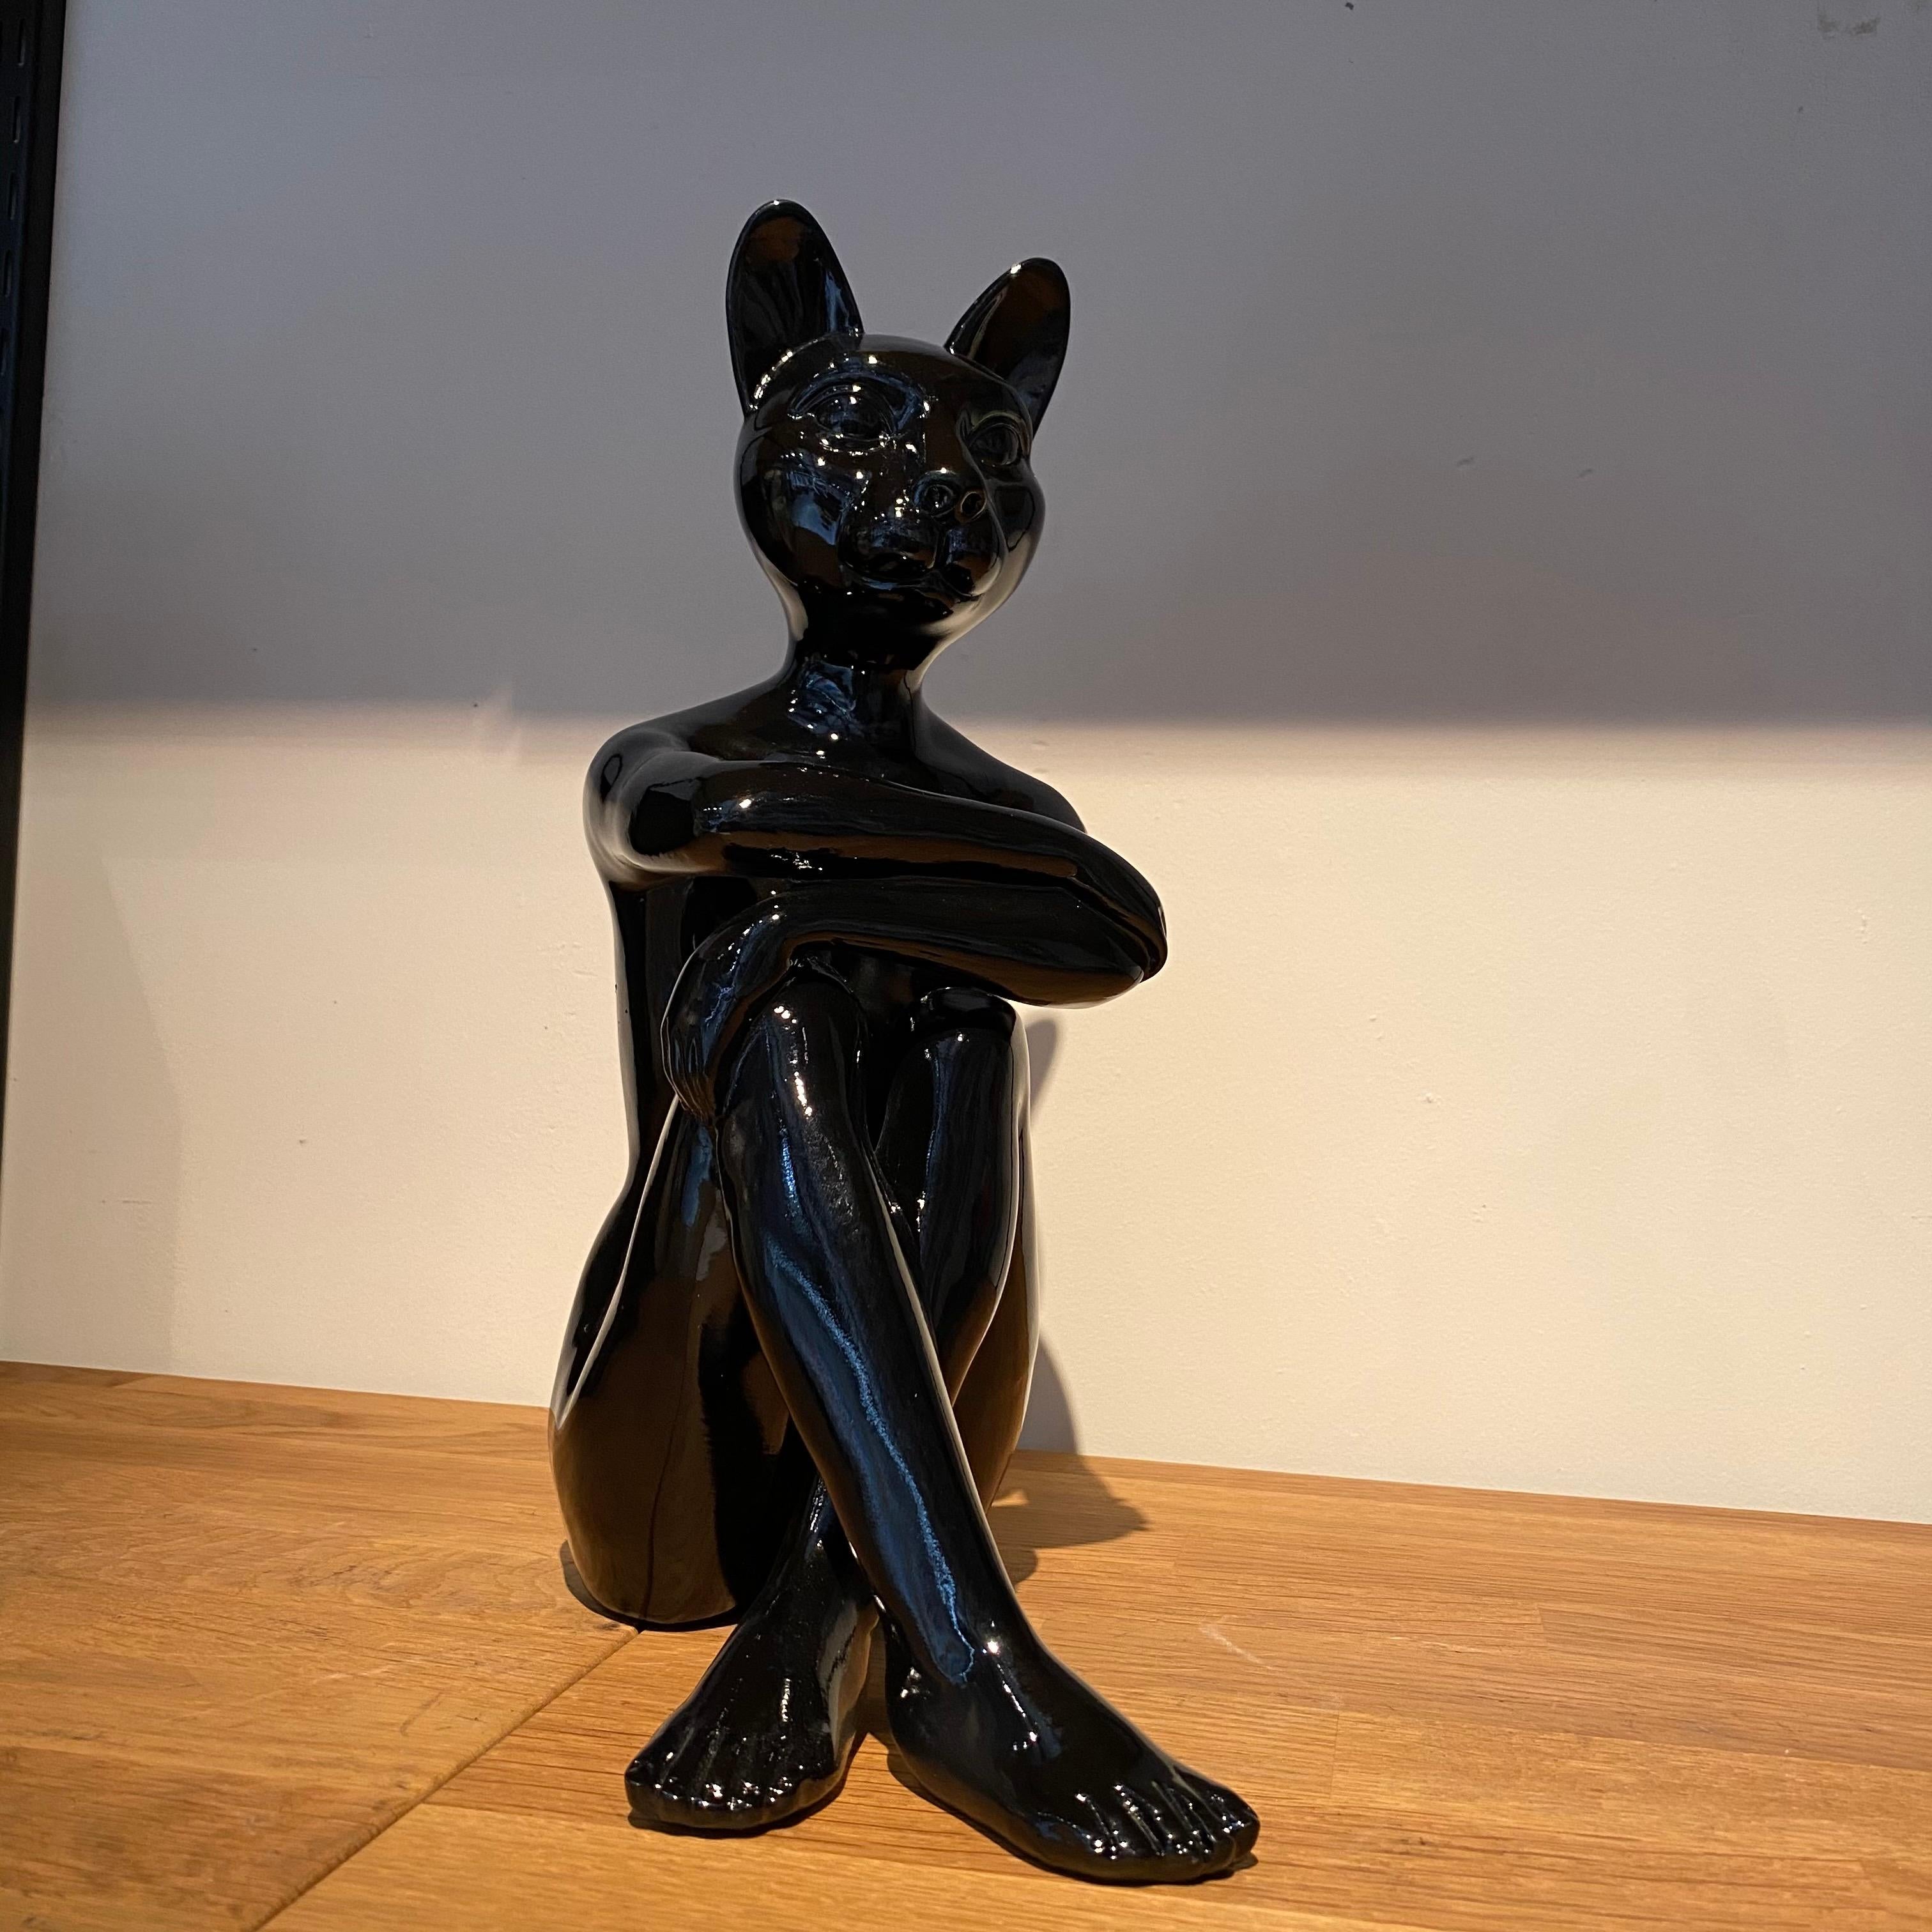 Title: City Kitten (Black)
Authentic polyresin sculpture
Open Edition

World Famous Contemporary Artists: Husband and wife team, Gillie and Marc, are New York and Sydney-based contemporary artists who collaborate to create artworks as one. Gillie